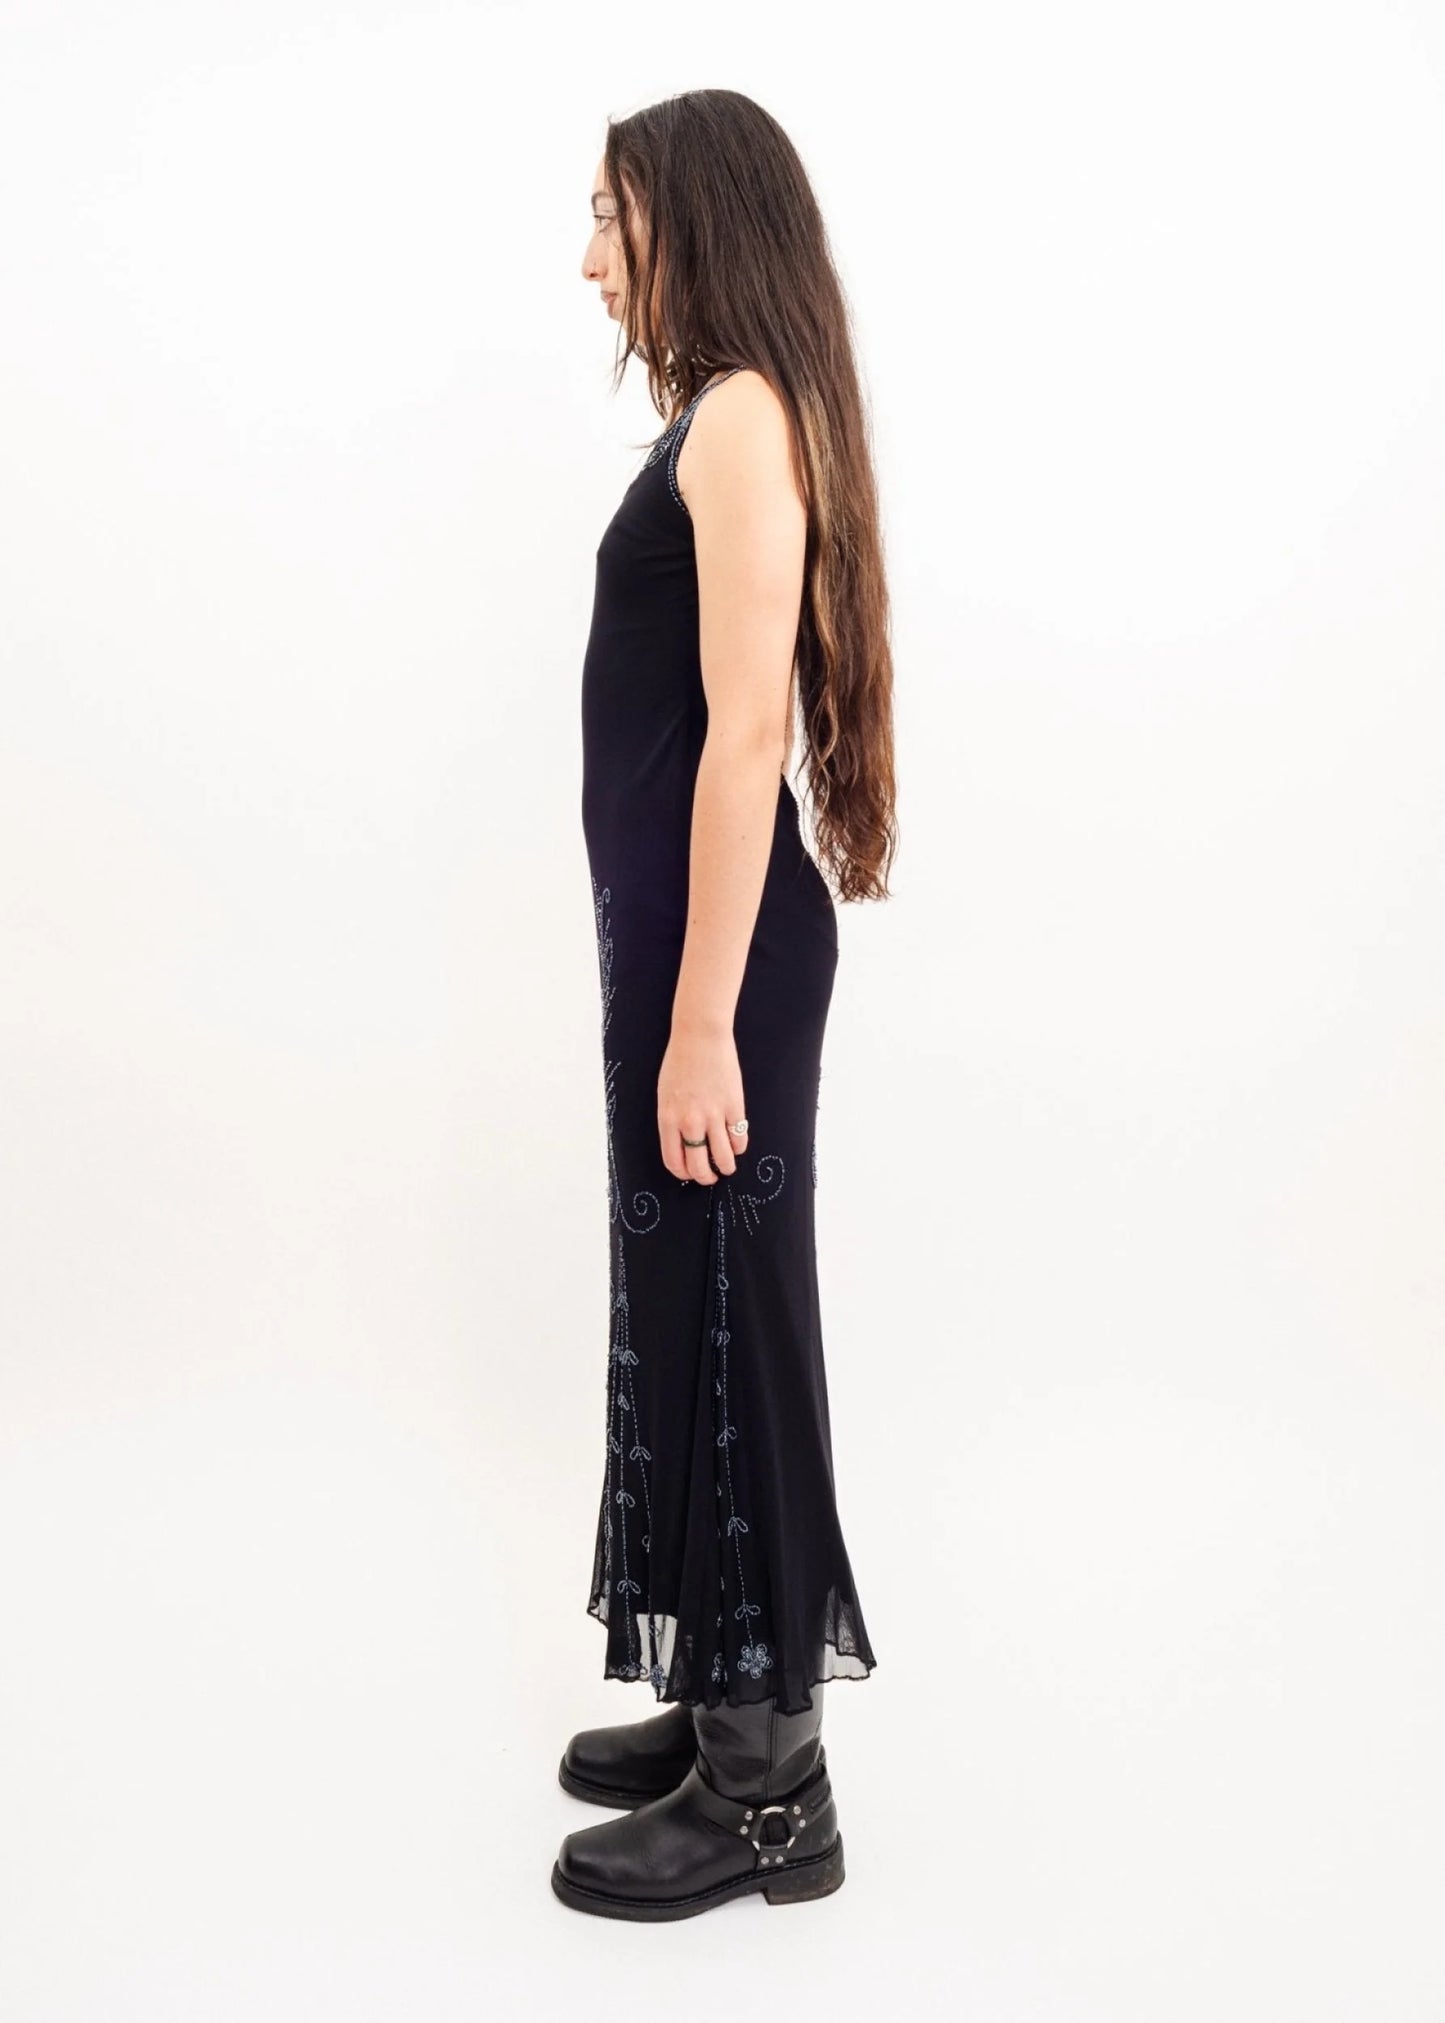 Basix Low back beaded 90s grunge gown